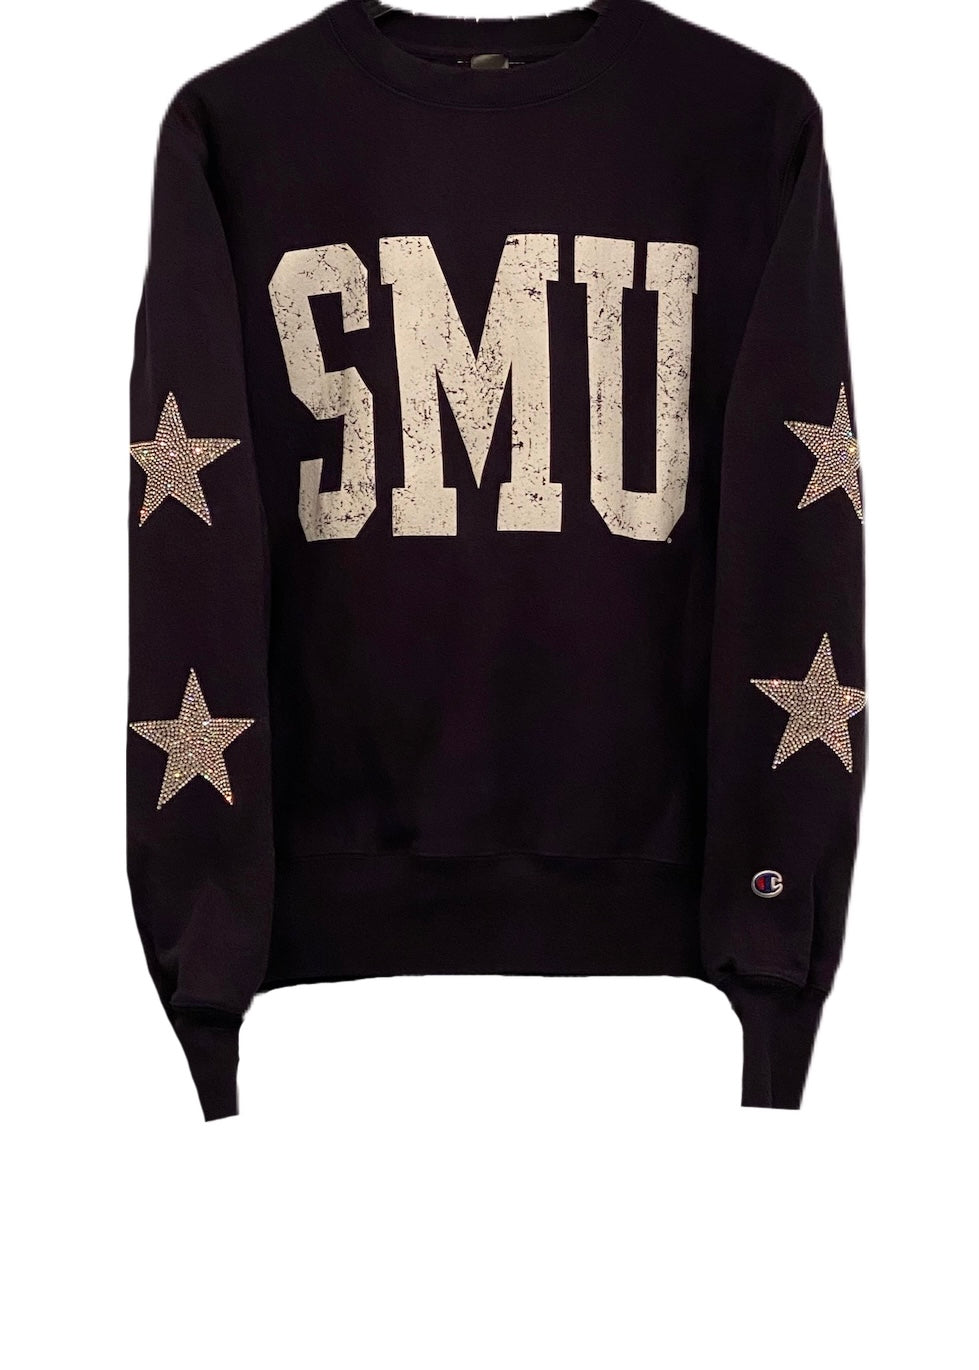 Southern Methodist University, One of a KIND Vintage SMU Sweatshirt with Crystal Star Design with Custom Name